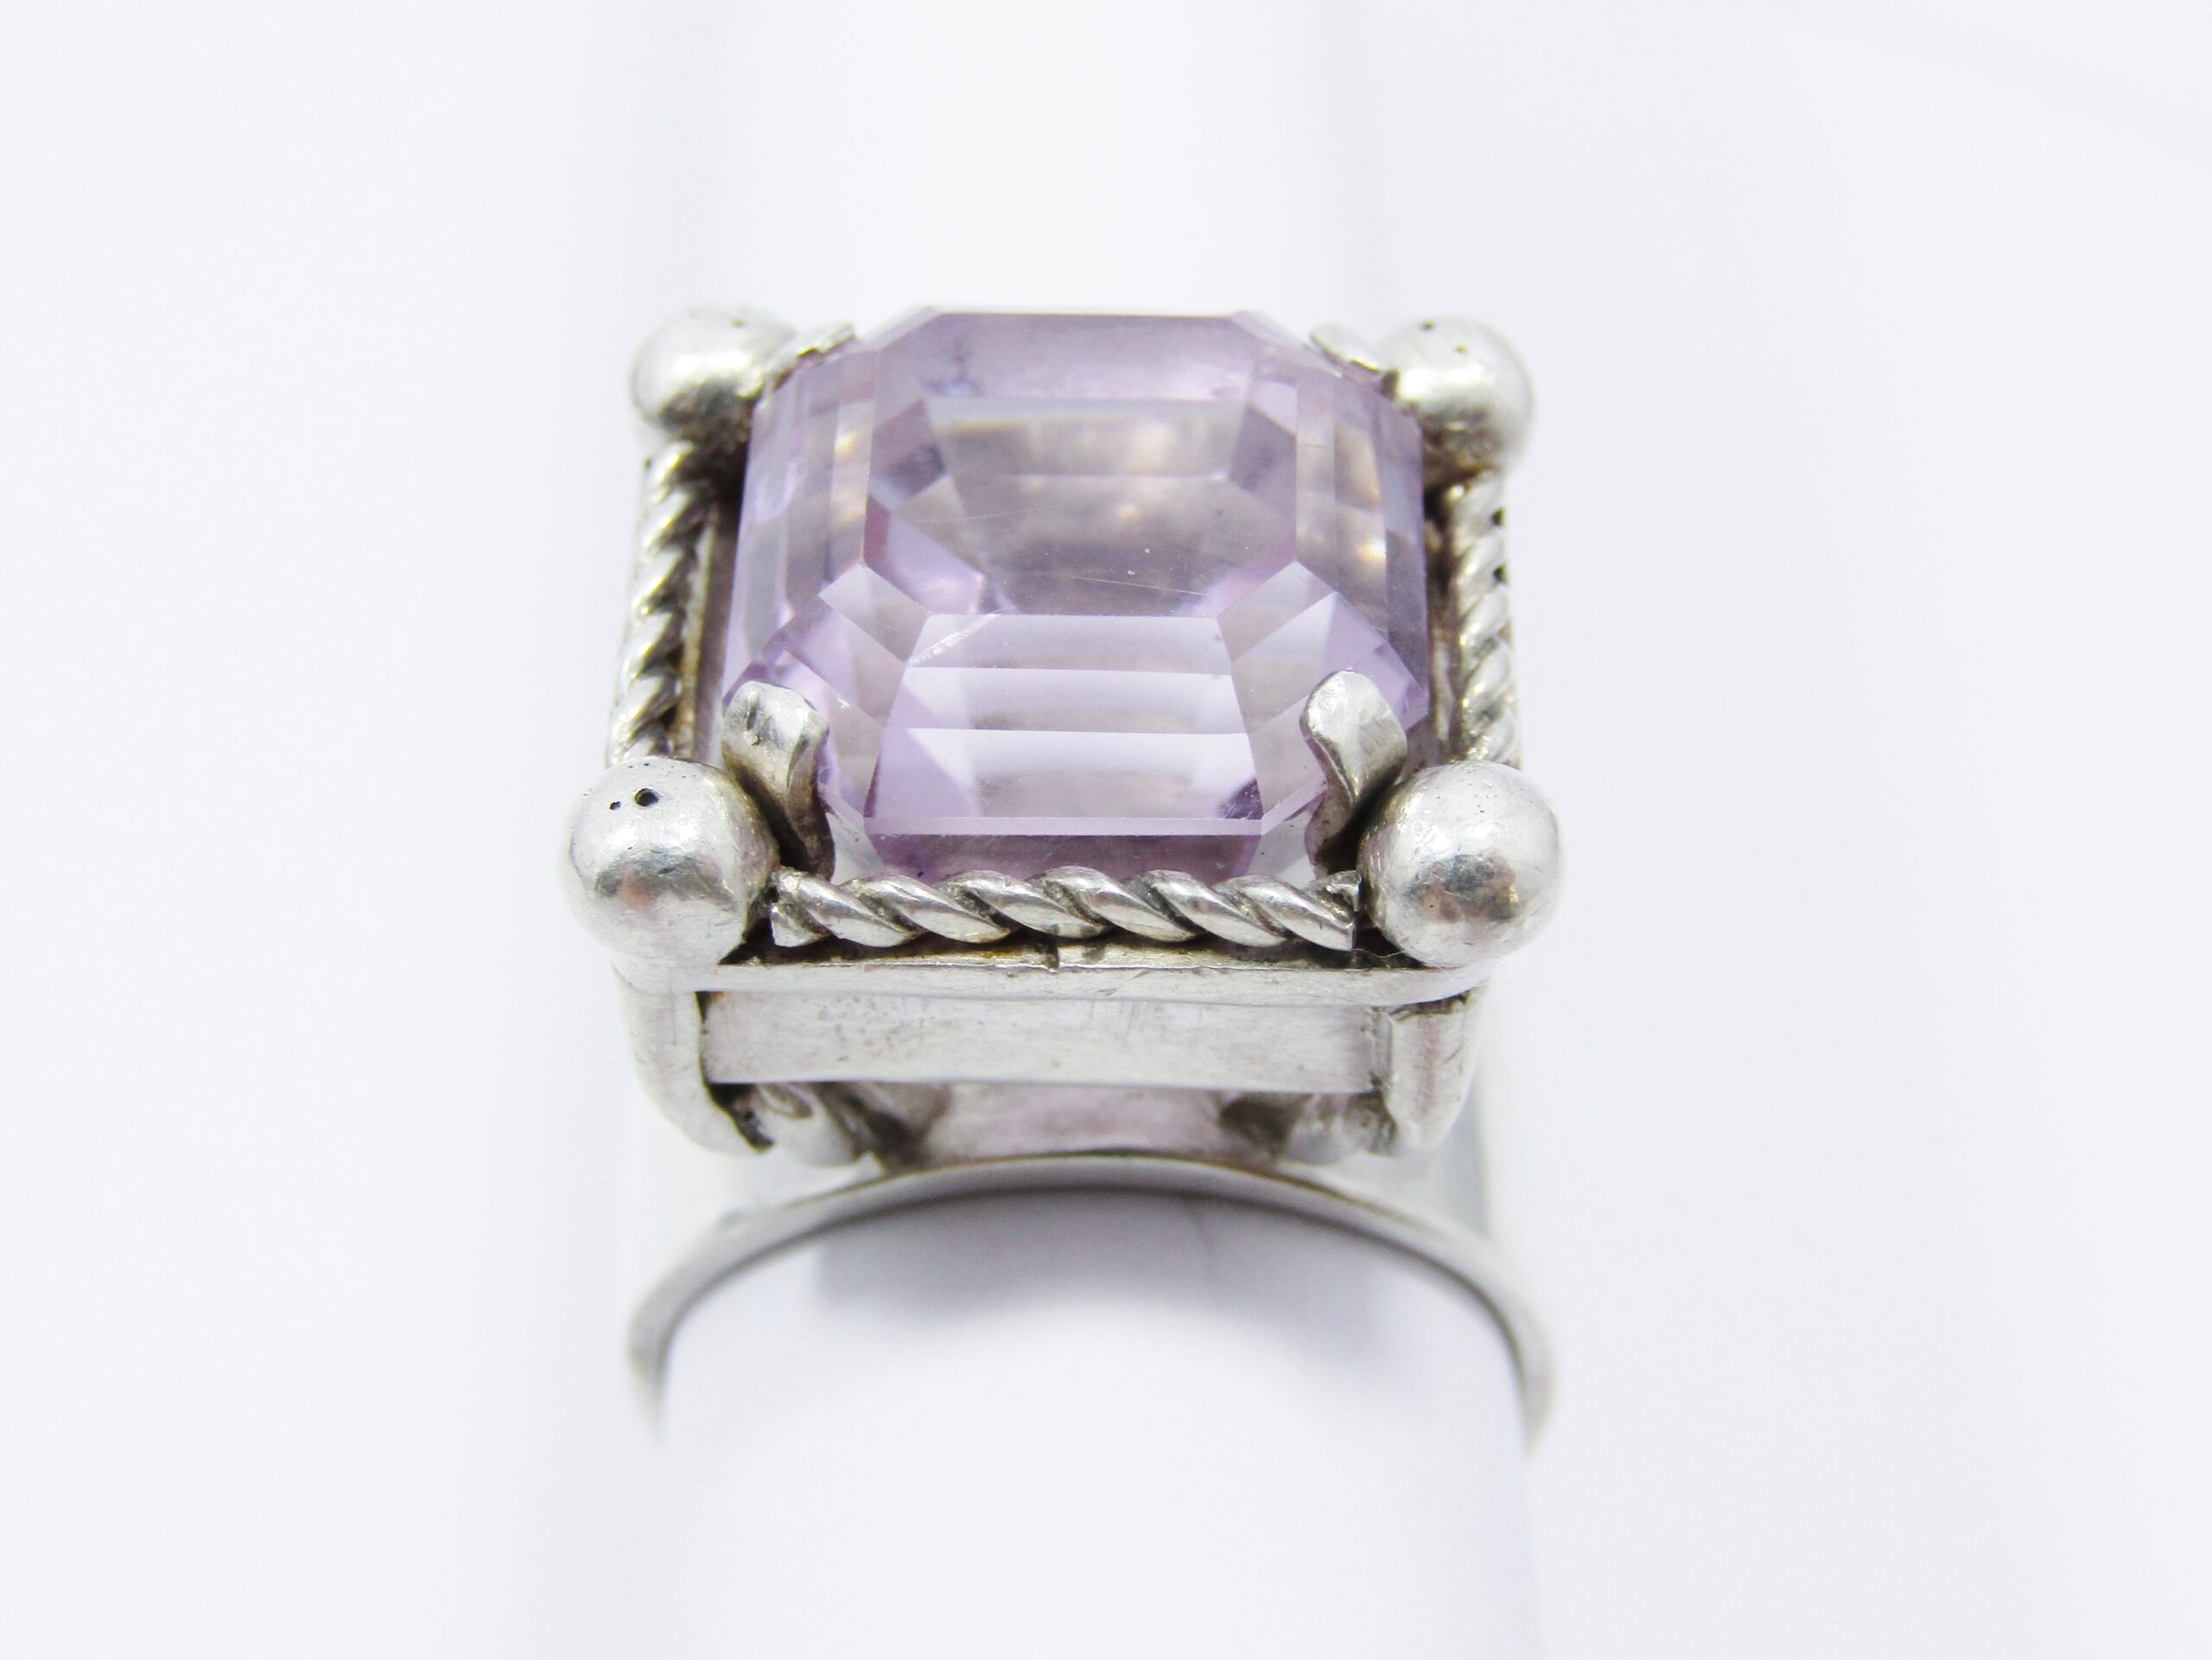 A Gorgeous Bespoke Chunky Amethyst Ring in Sterling Silver